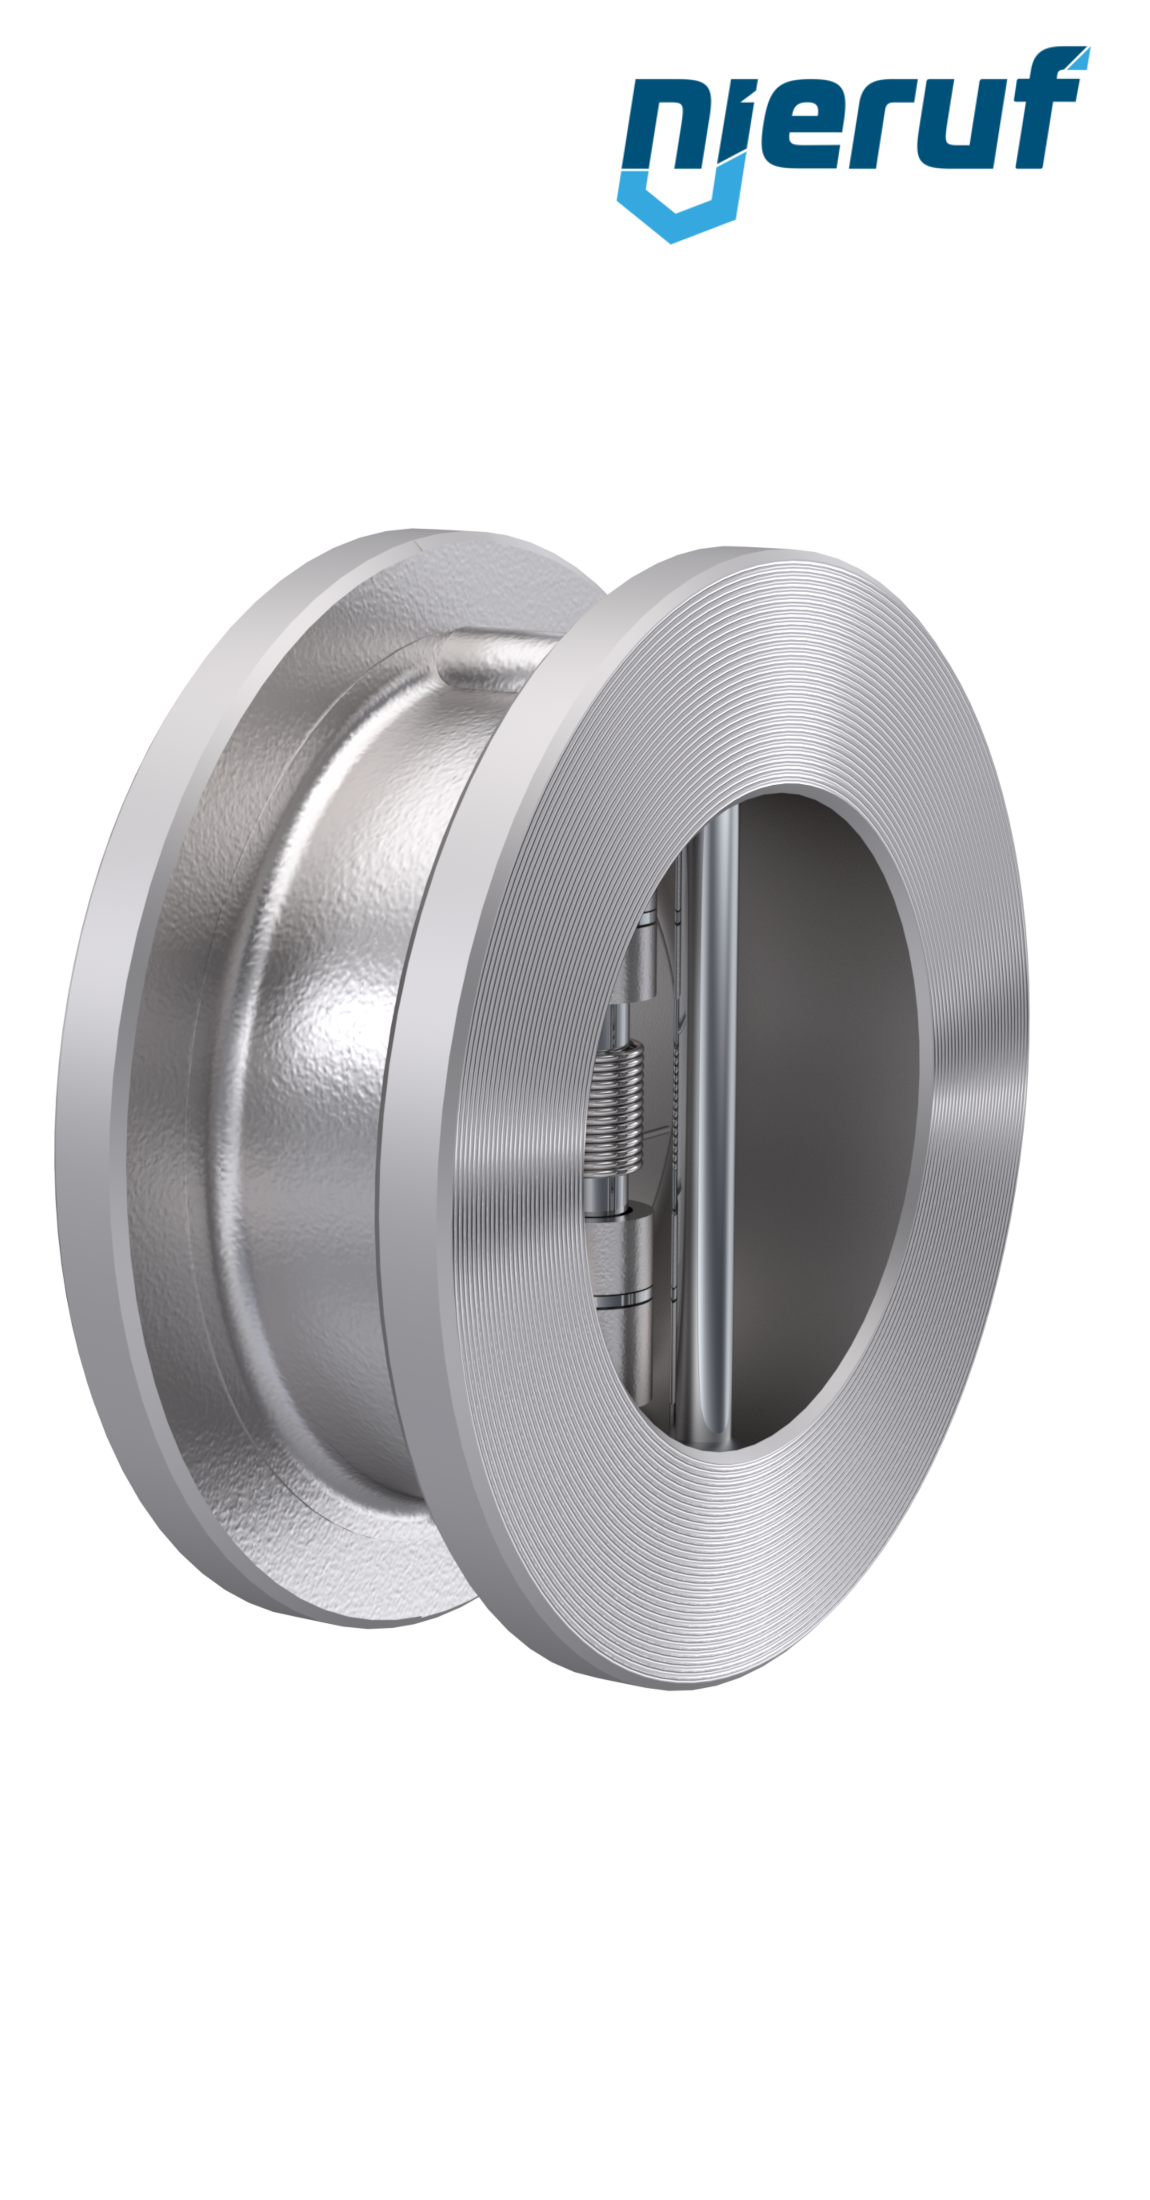 dual plate check valve DN50 DR03 ANSI 150 stainless steel 1.4408 metal